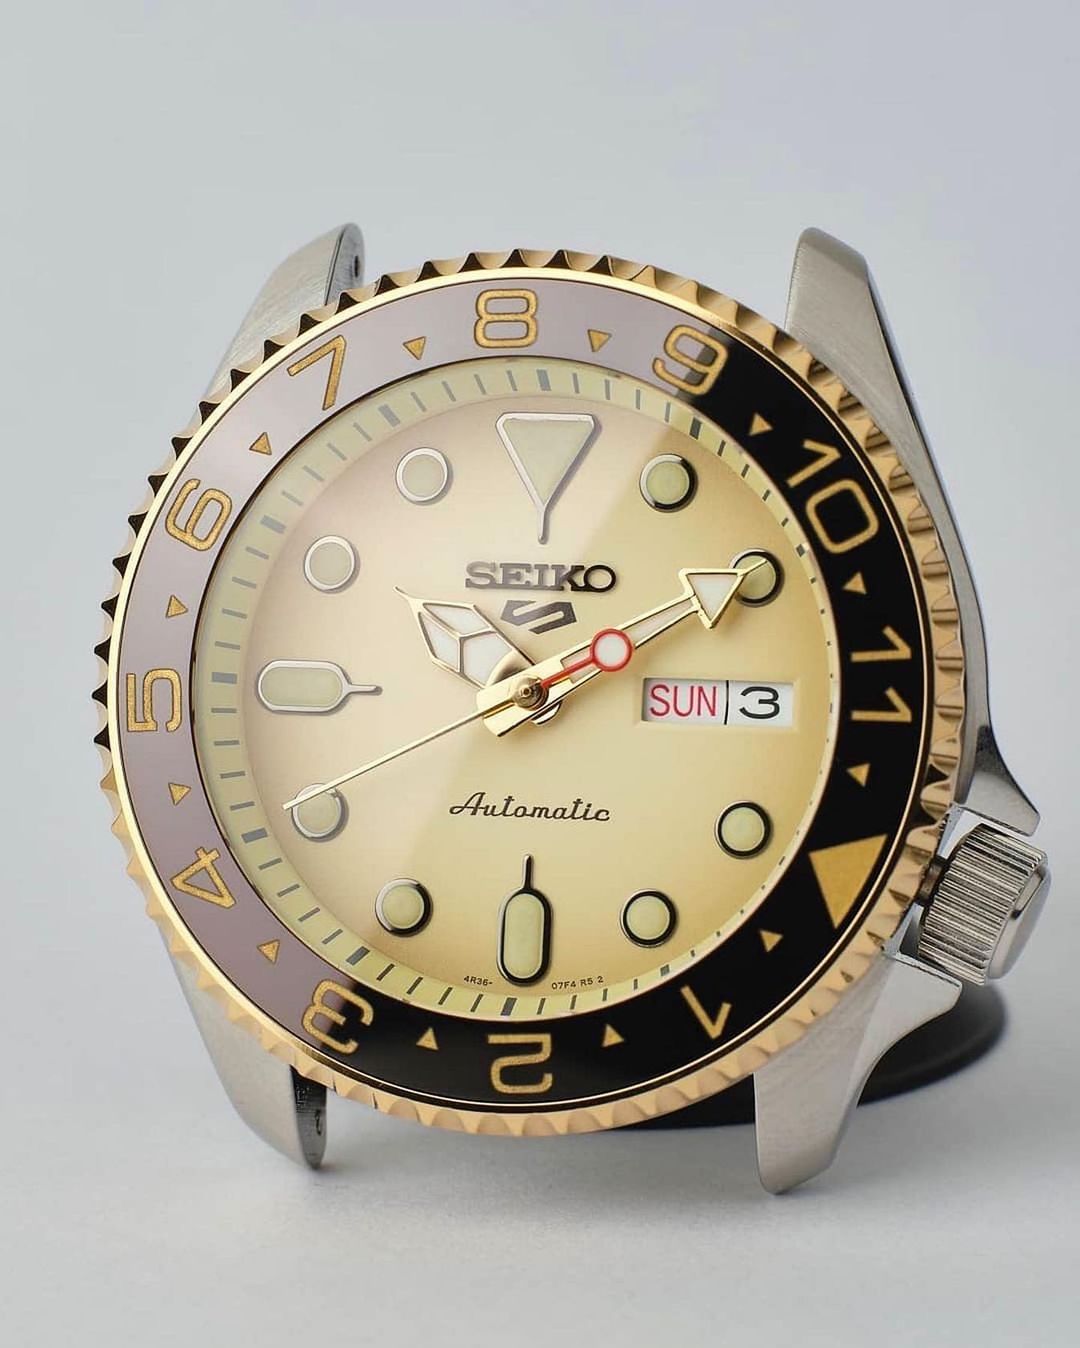 Bezel - SKX007/SRPD Deep Sea - Polished PVD Gold - DLW WATCHES